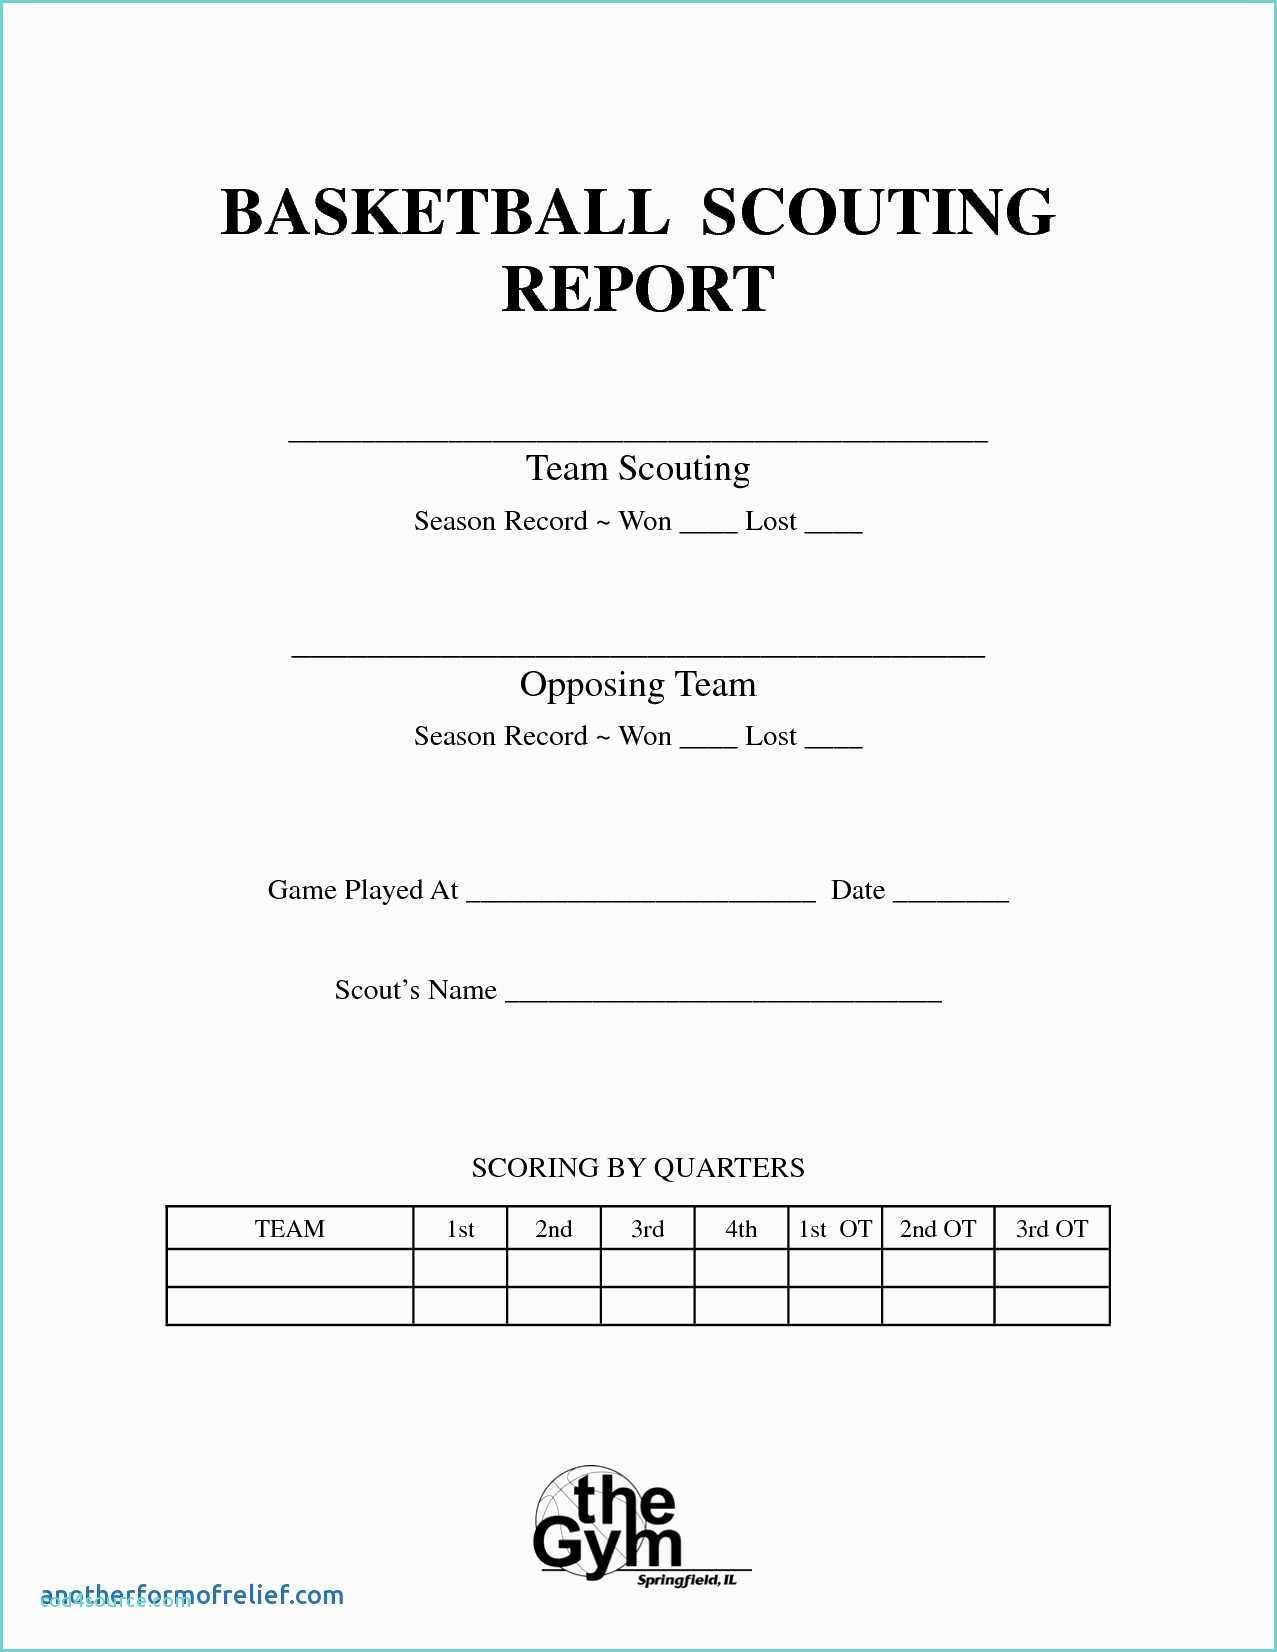 Report Examples College Basketball Scouting Template Team Within Scouting Report Template Basketball